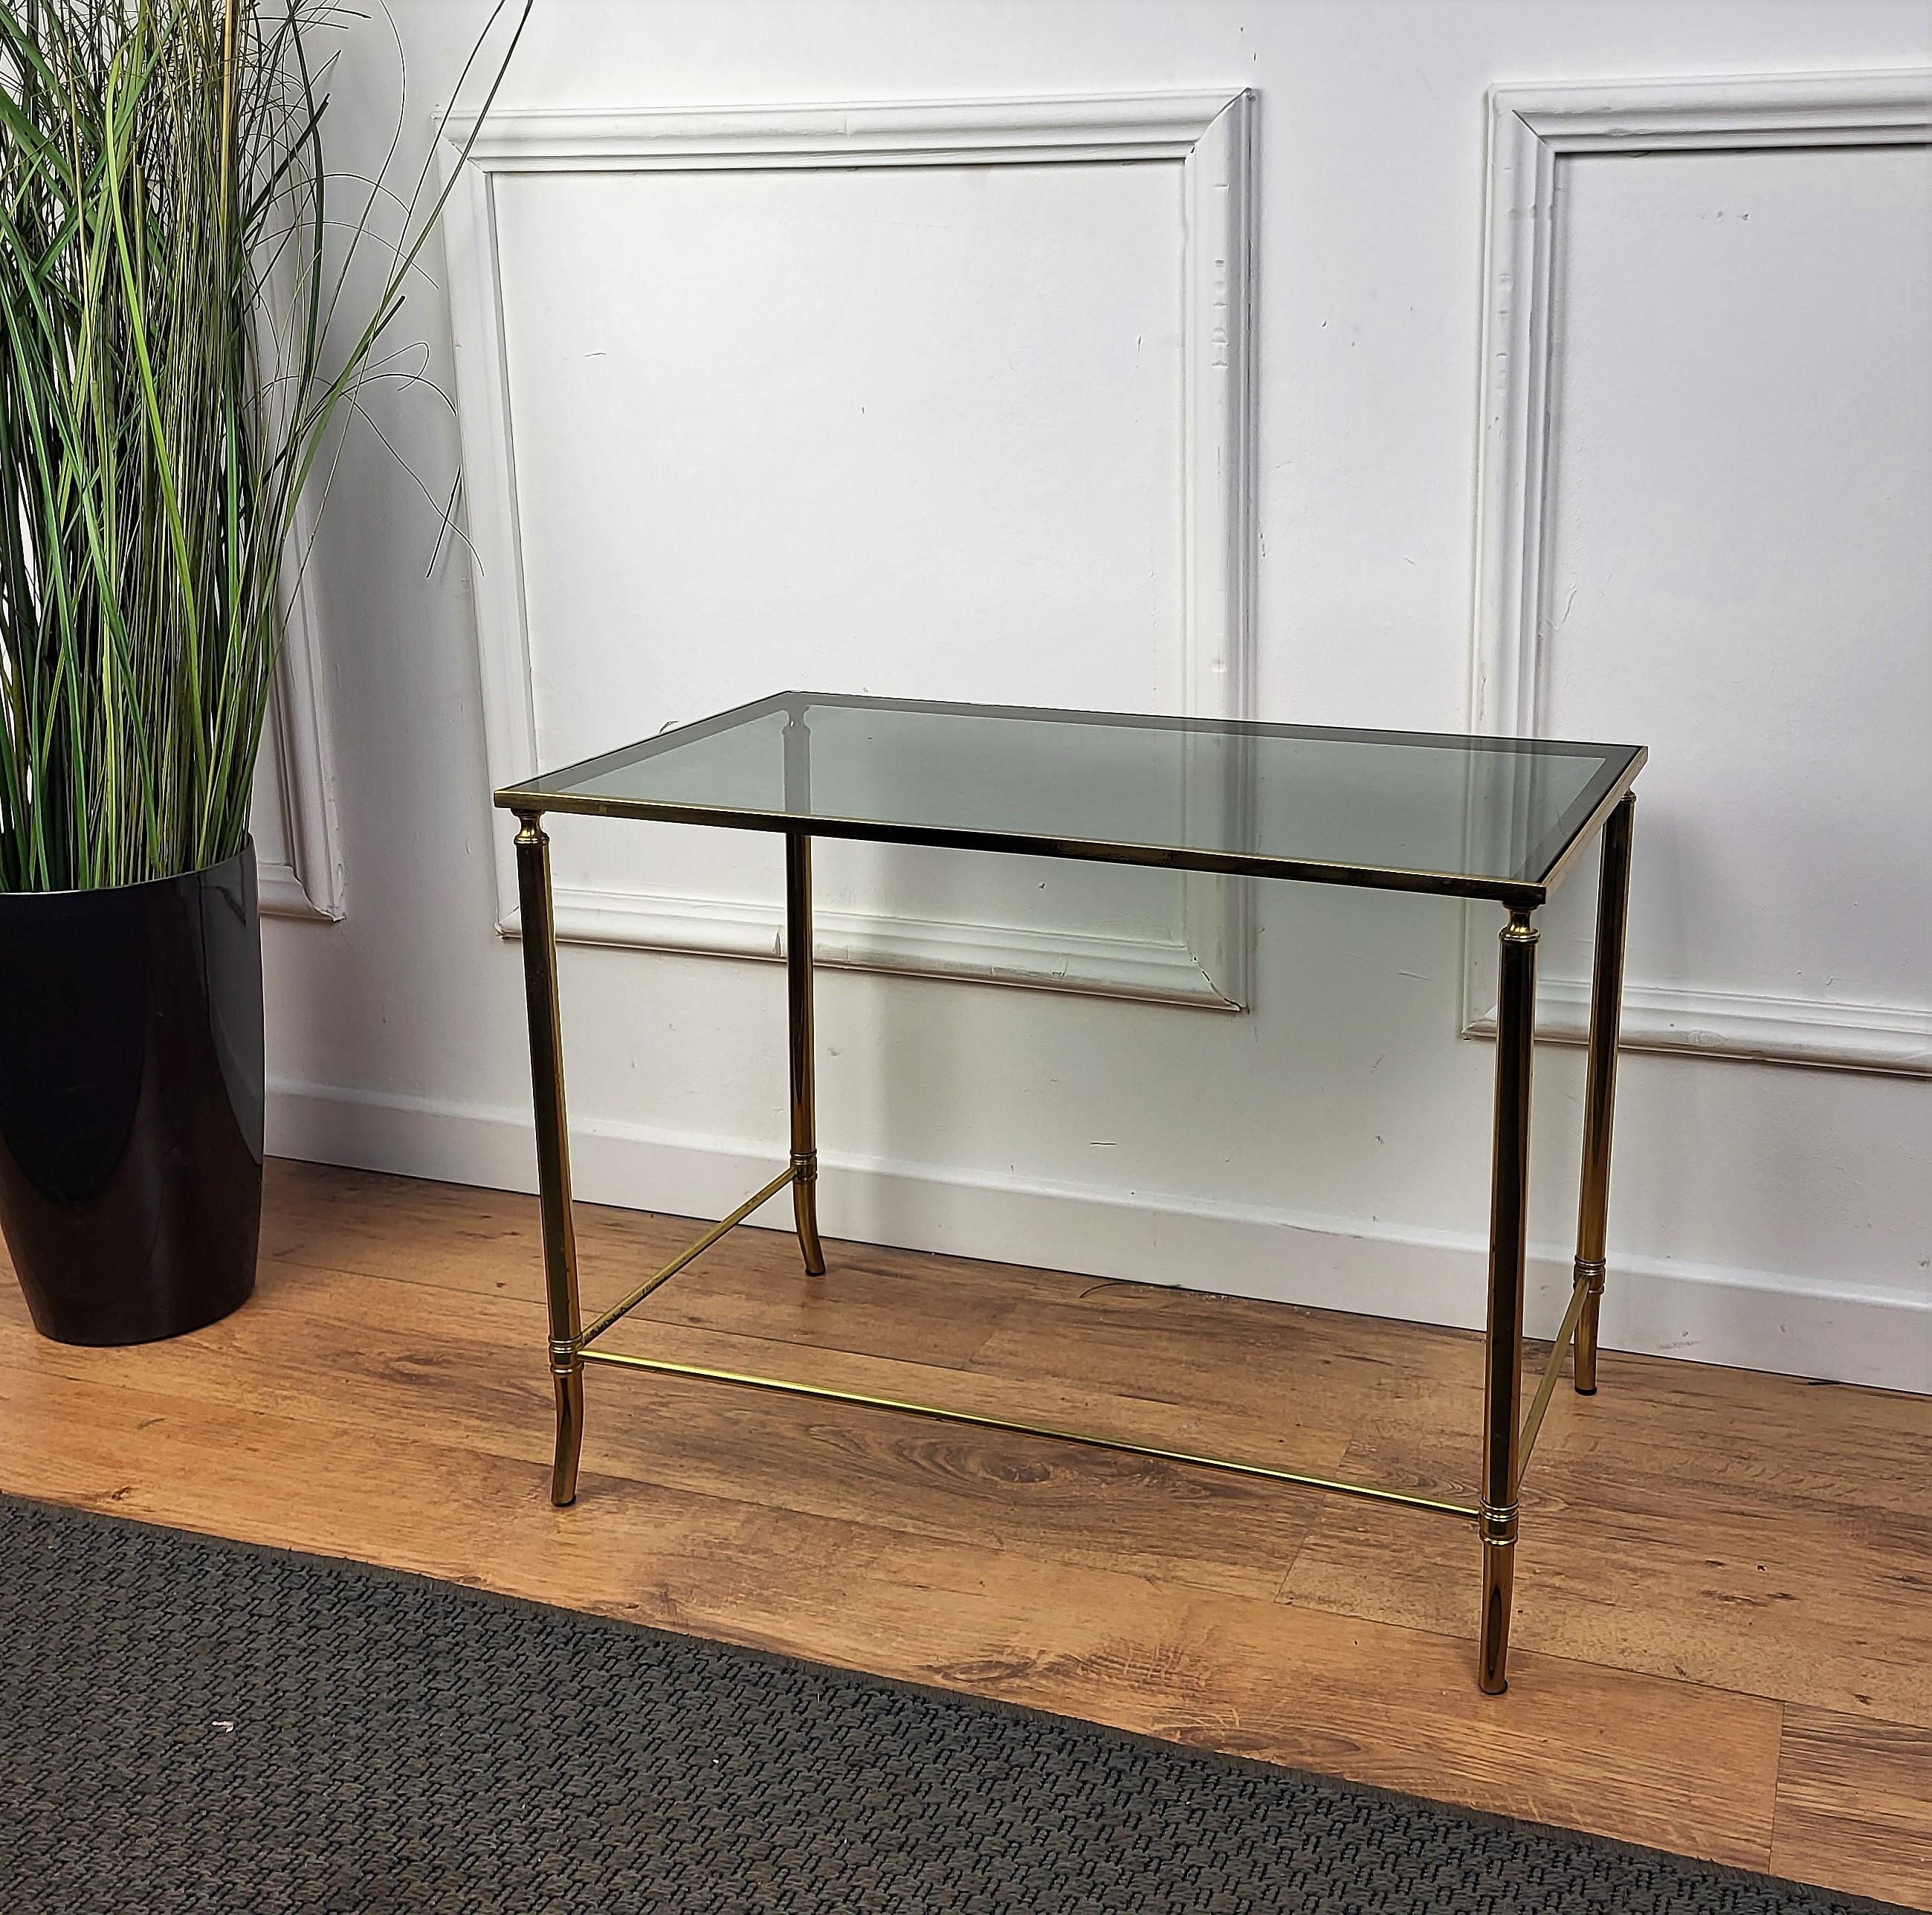 Beautiful and stylish vintage 1980s Italian brass and smoked side table or coffee table or sofa table. Very good condition with great brass and glasses. A great piece that perfectly adds to every home decor the typical glitz, glamour and gold of